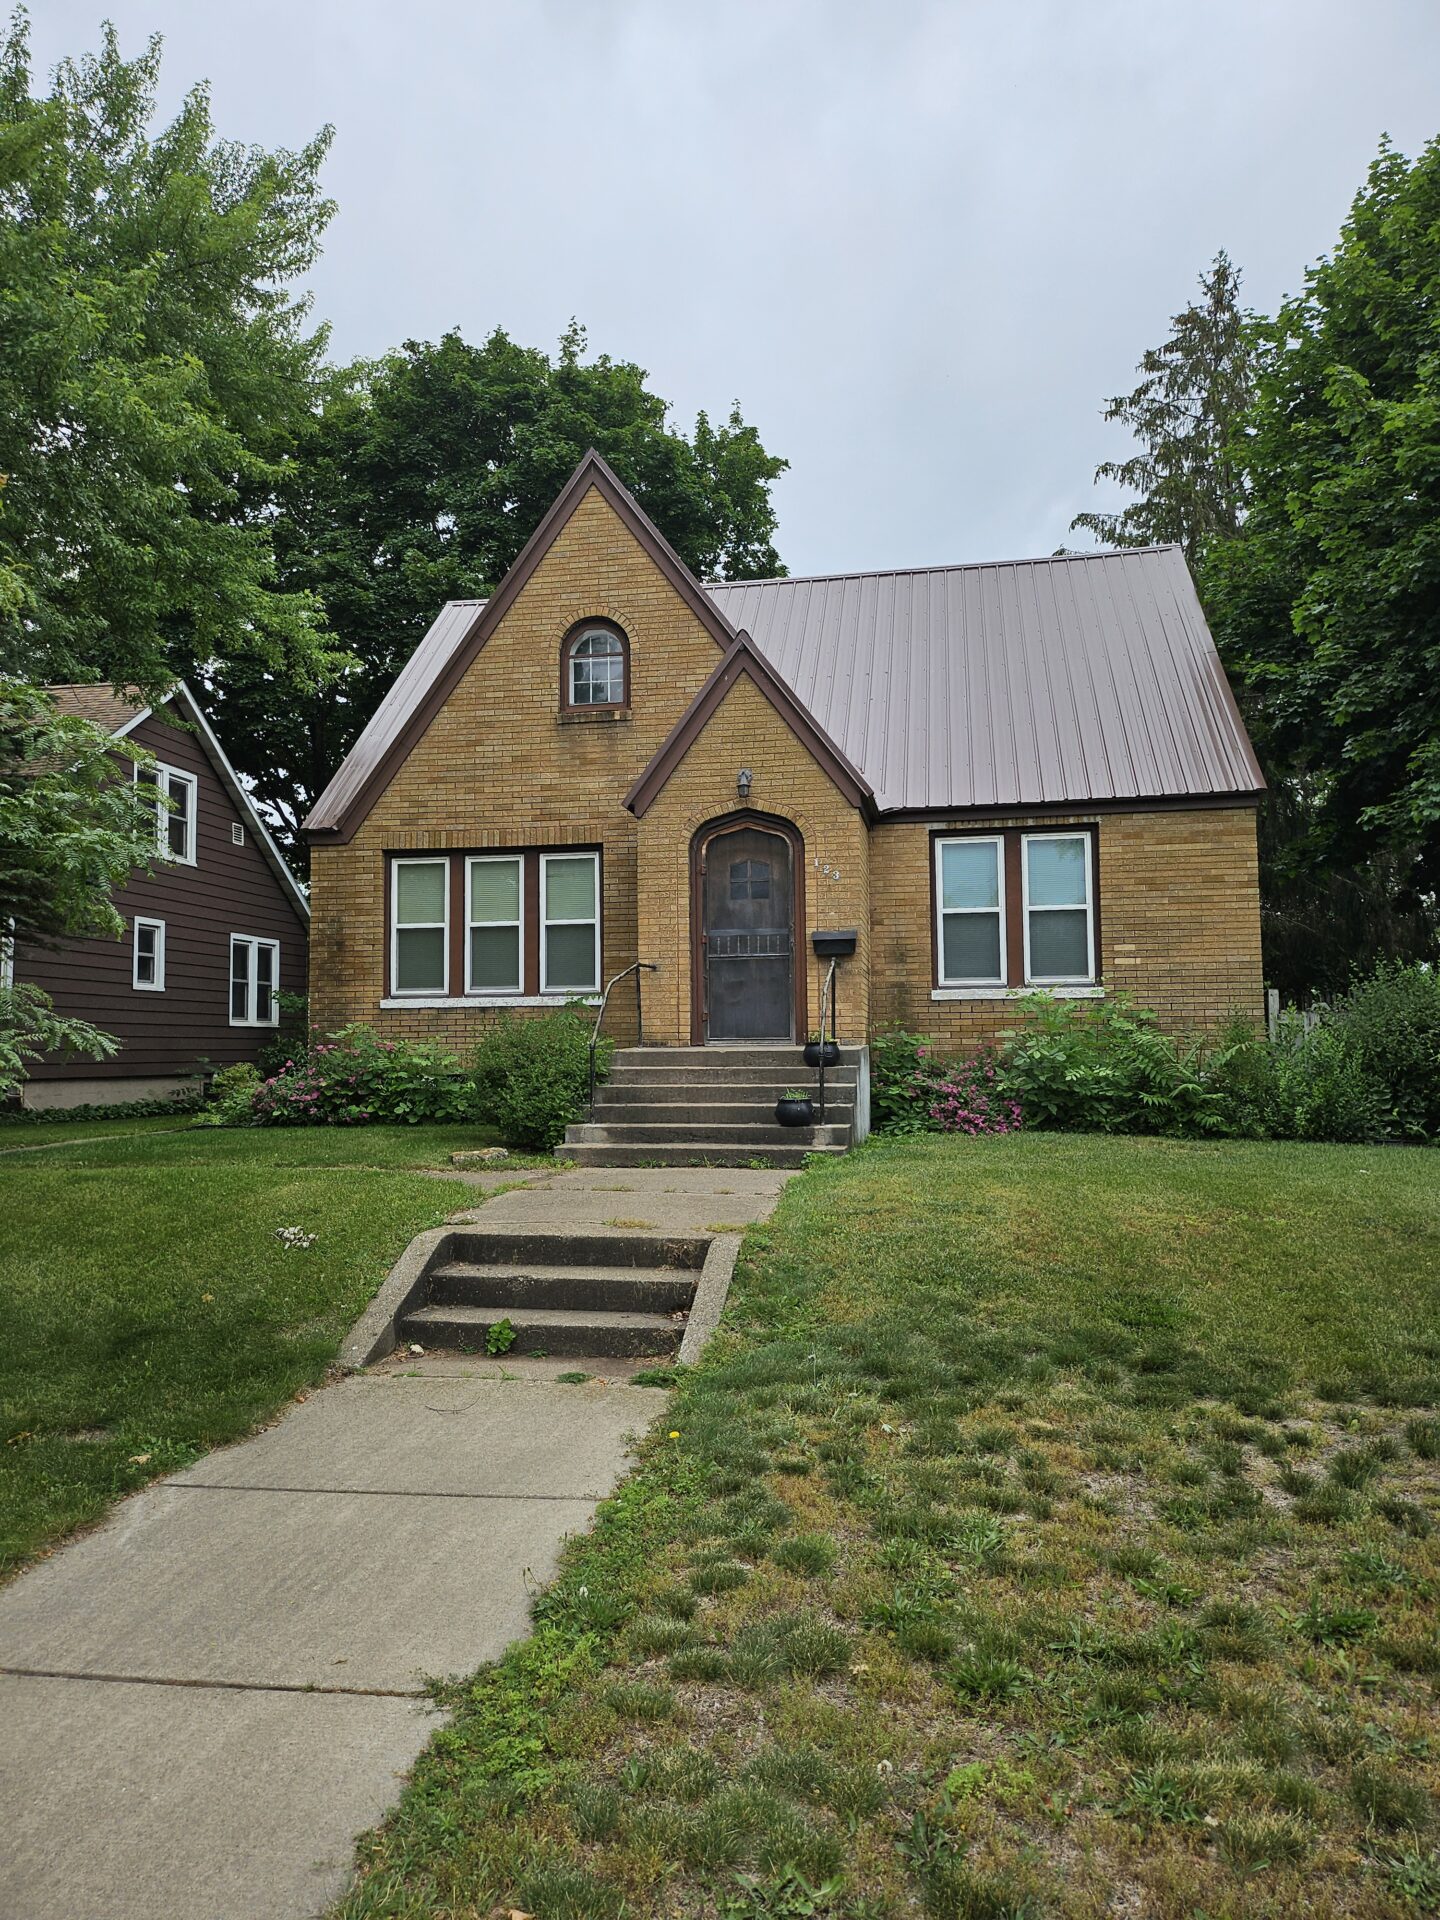 123 S Marquette - 3 Bedroom House